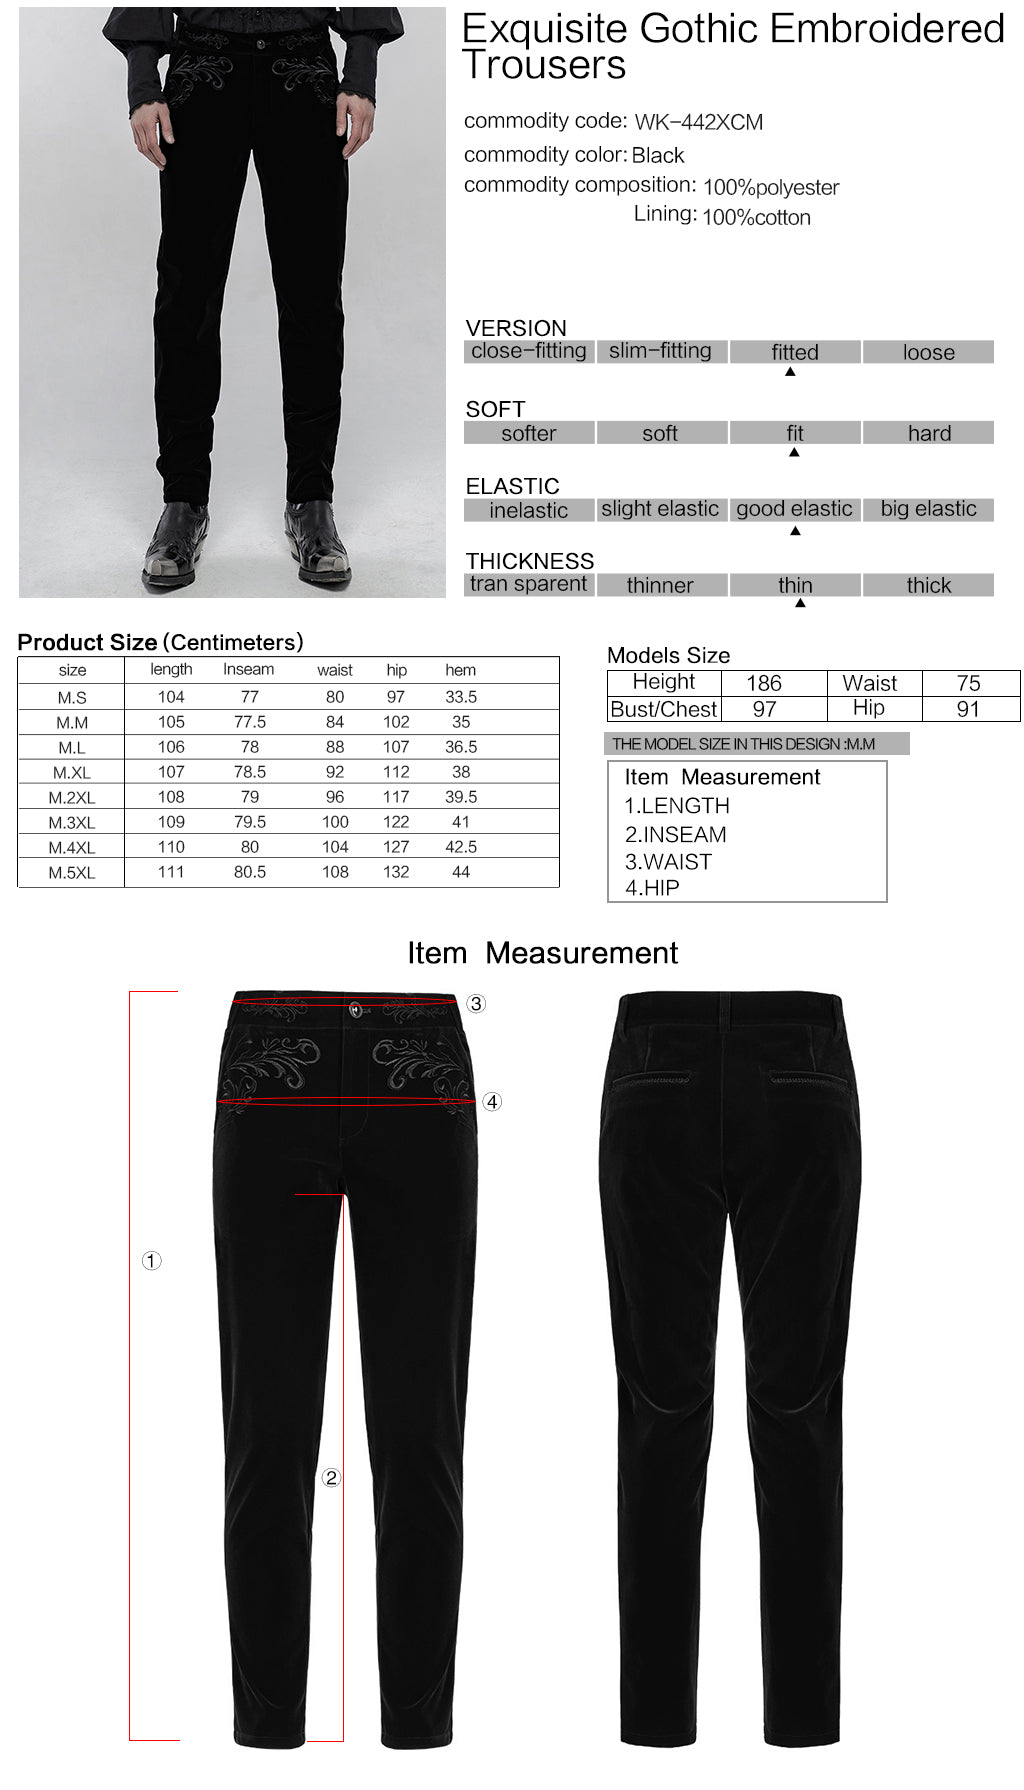 Black Embroidered Pants Exquisite Gothic Trousers